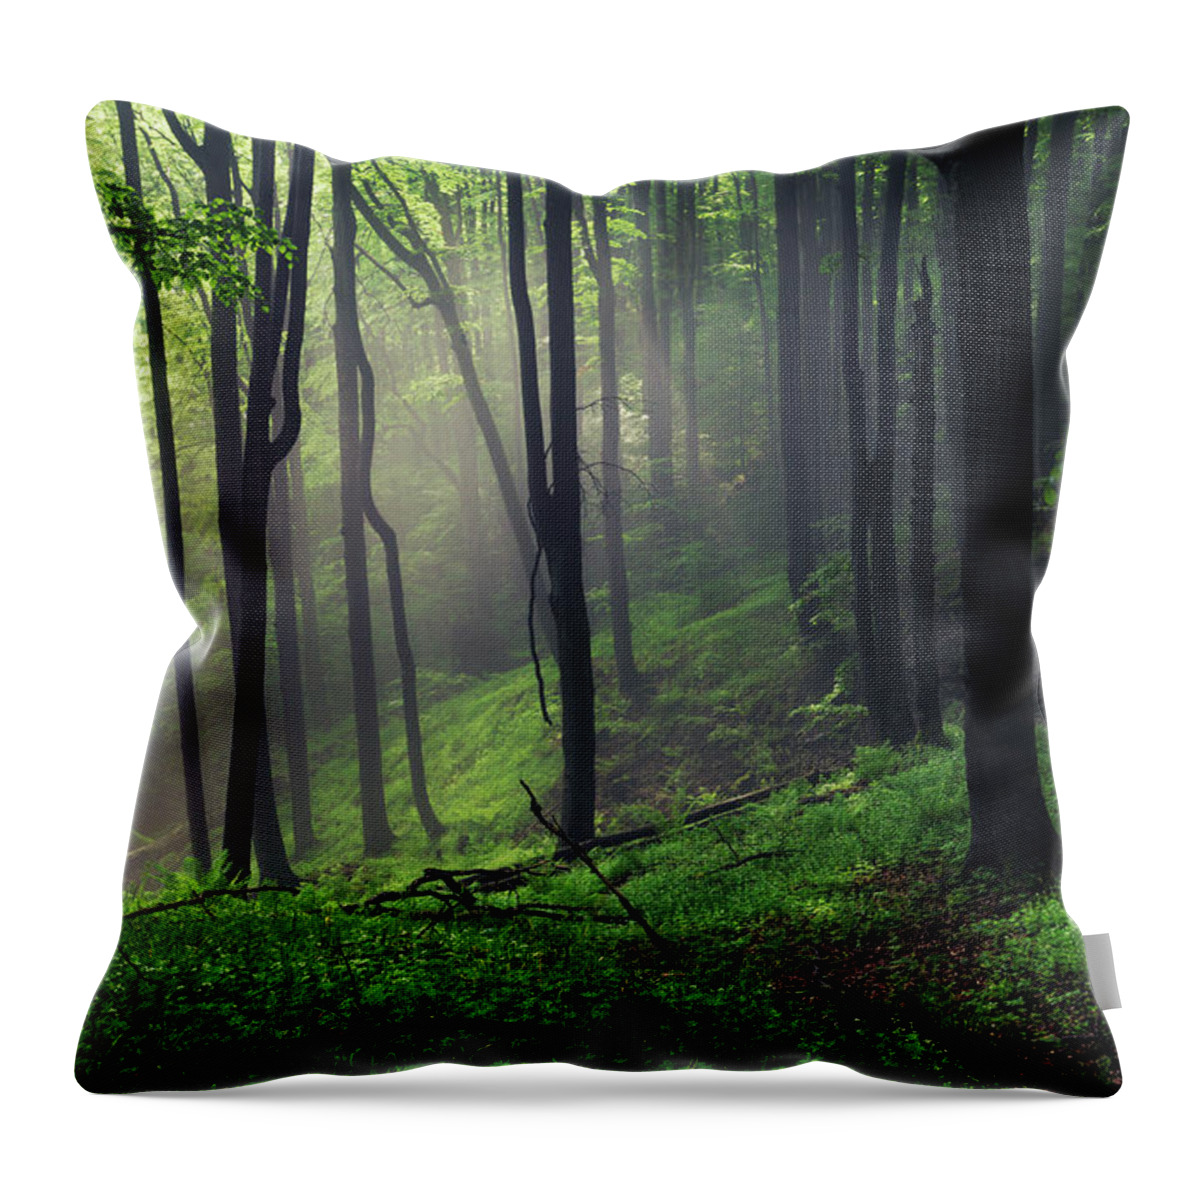 Mist Throw Pillow featuring the photograph Living Forest by Evgeni Dinev